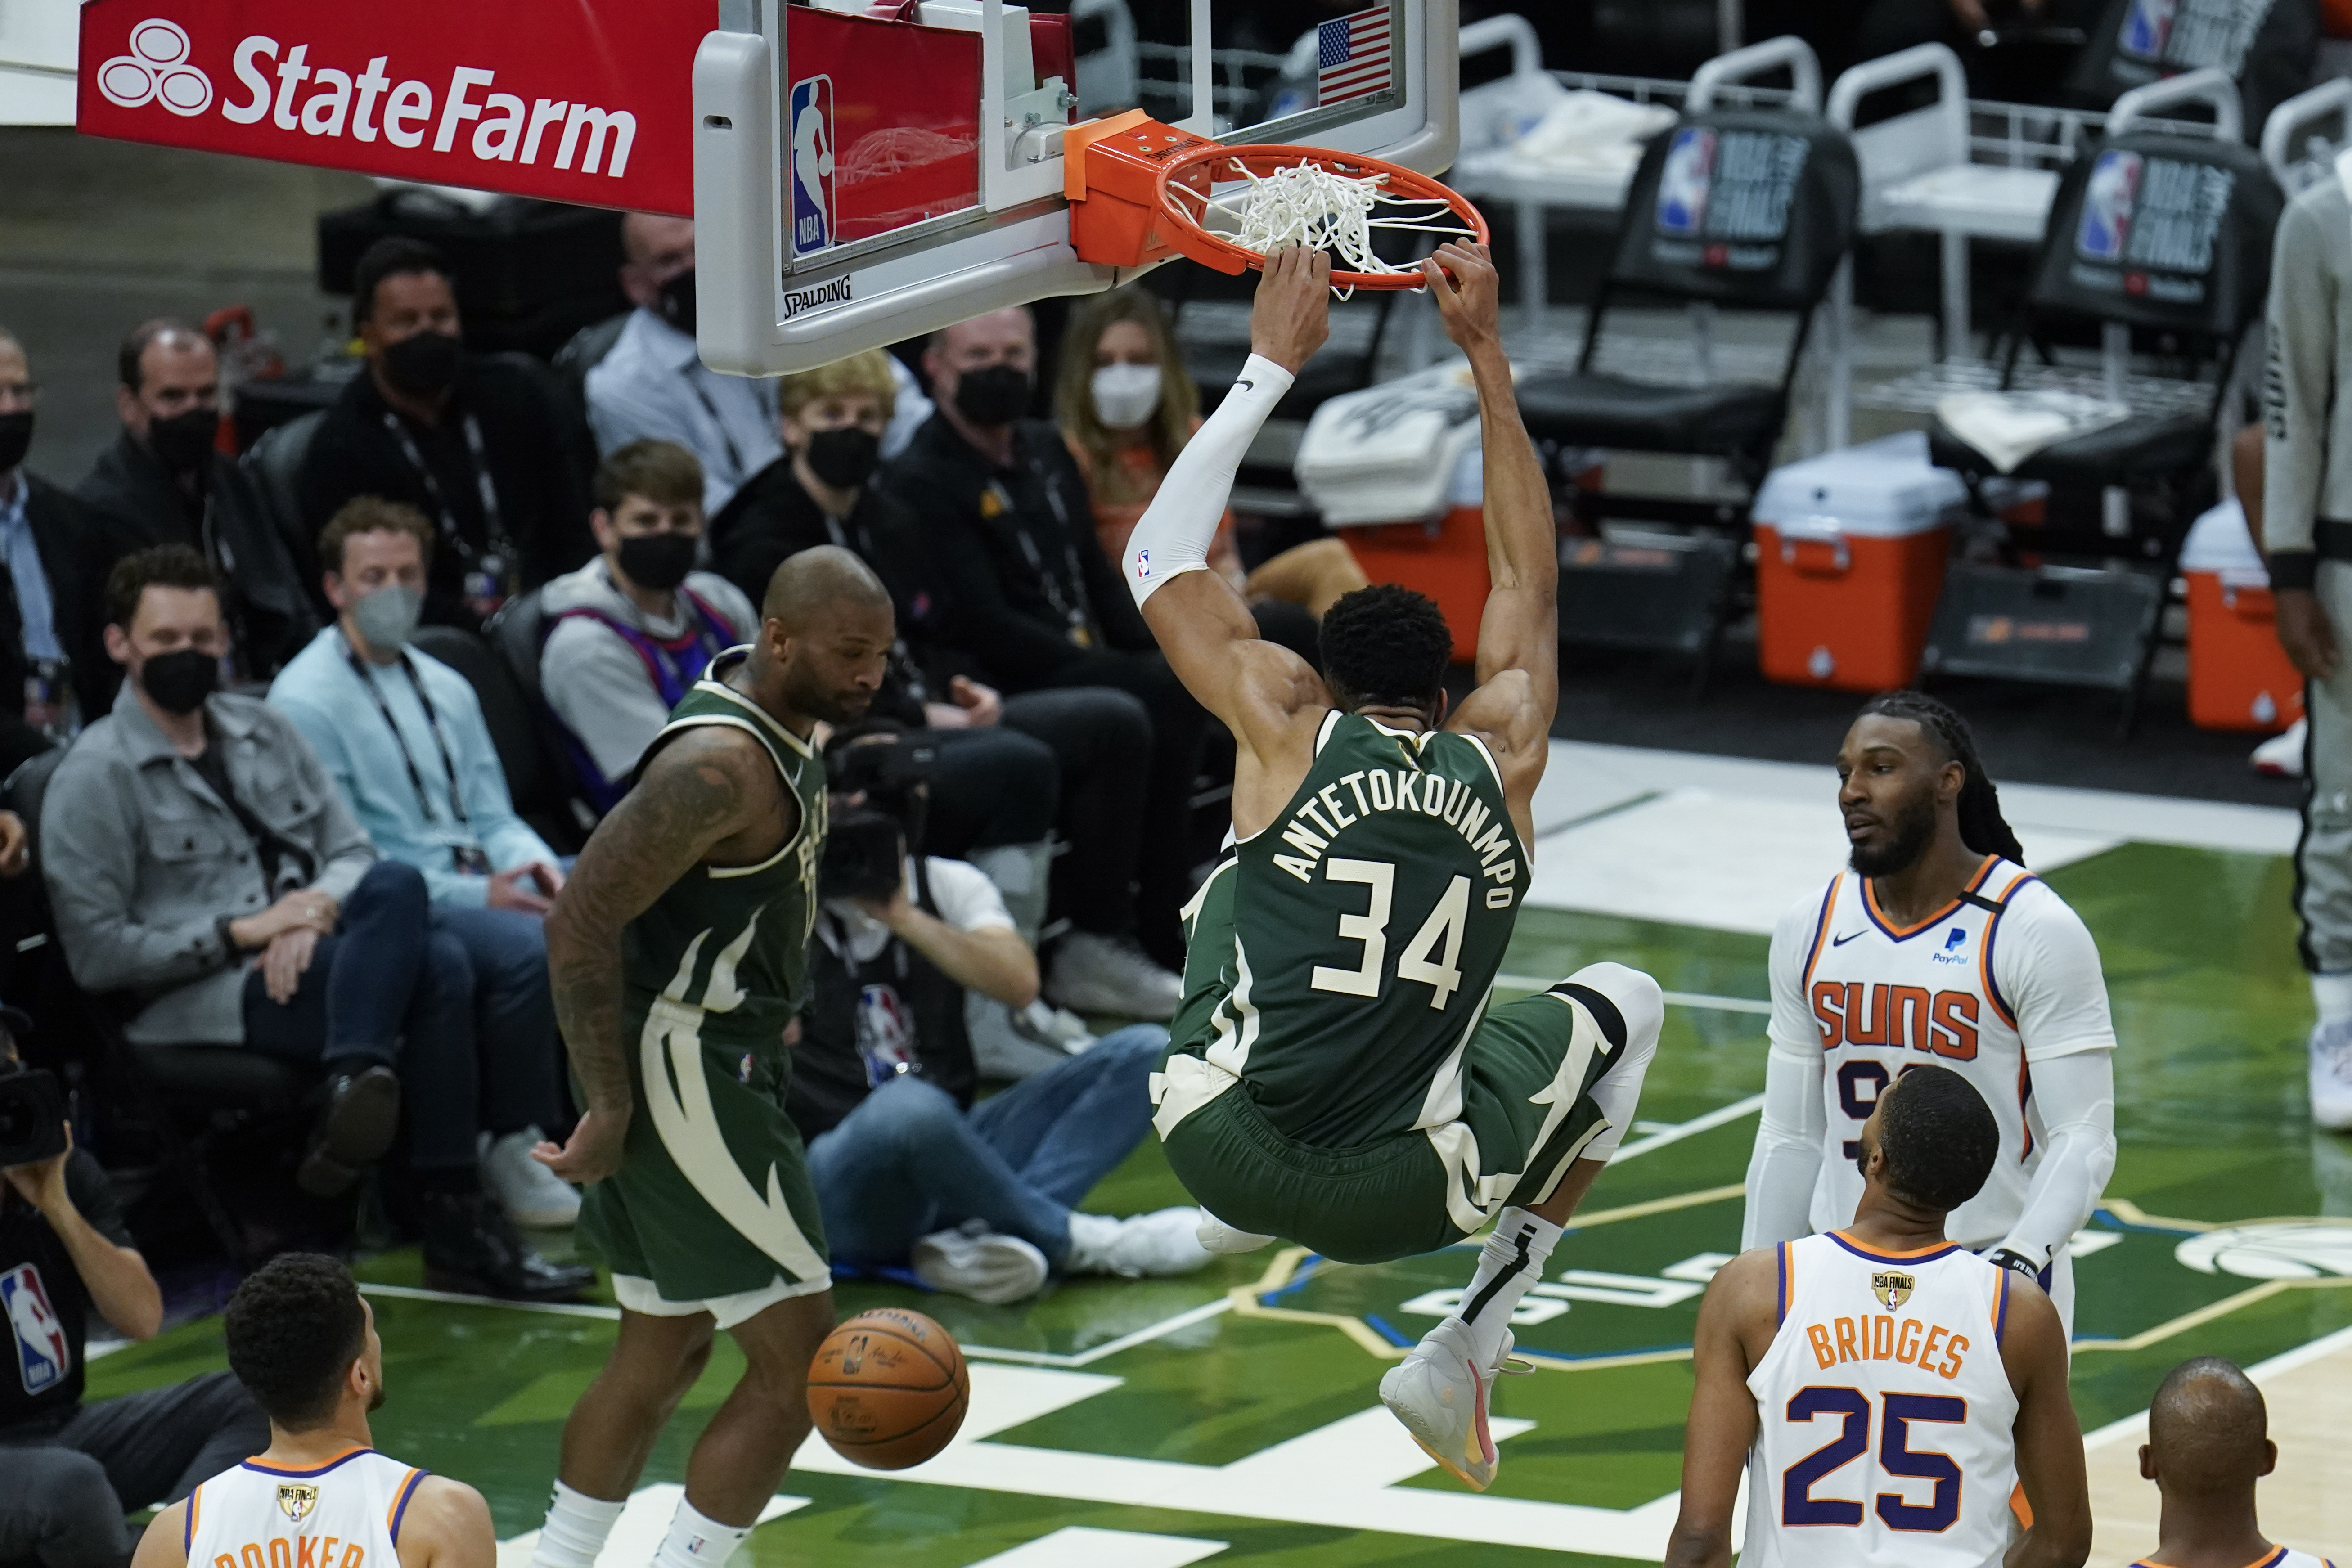 NBA Finals: Giannis, Milwaukee's patience pays off with long